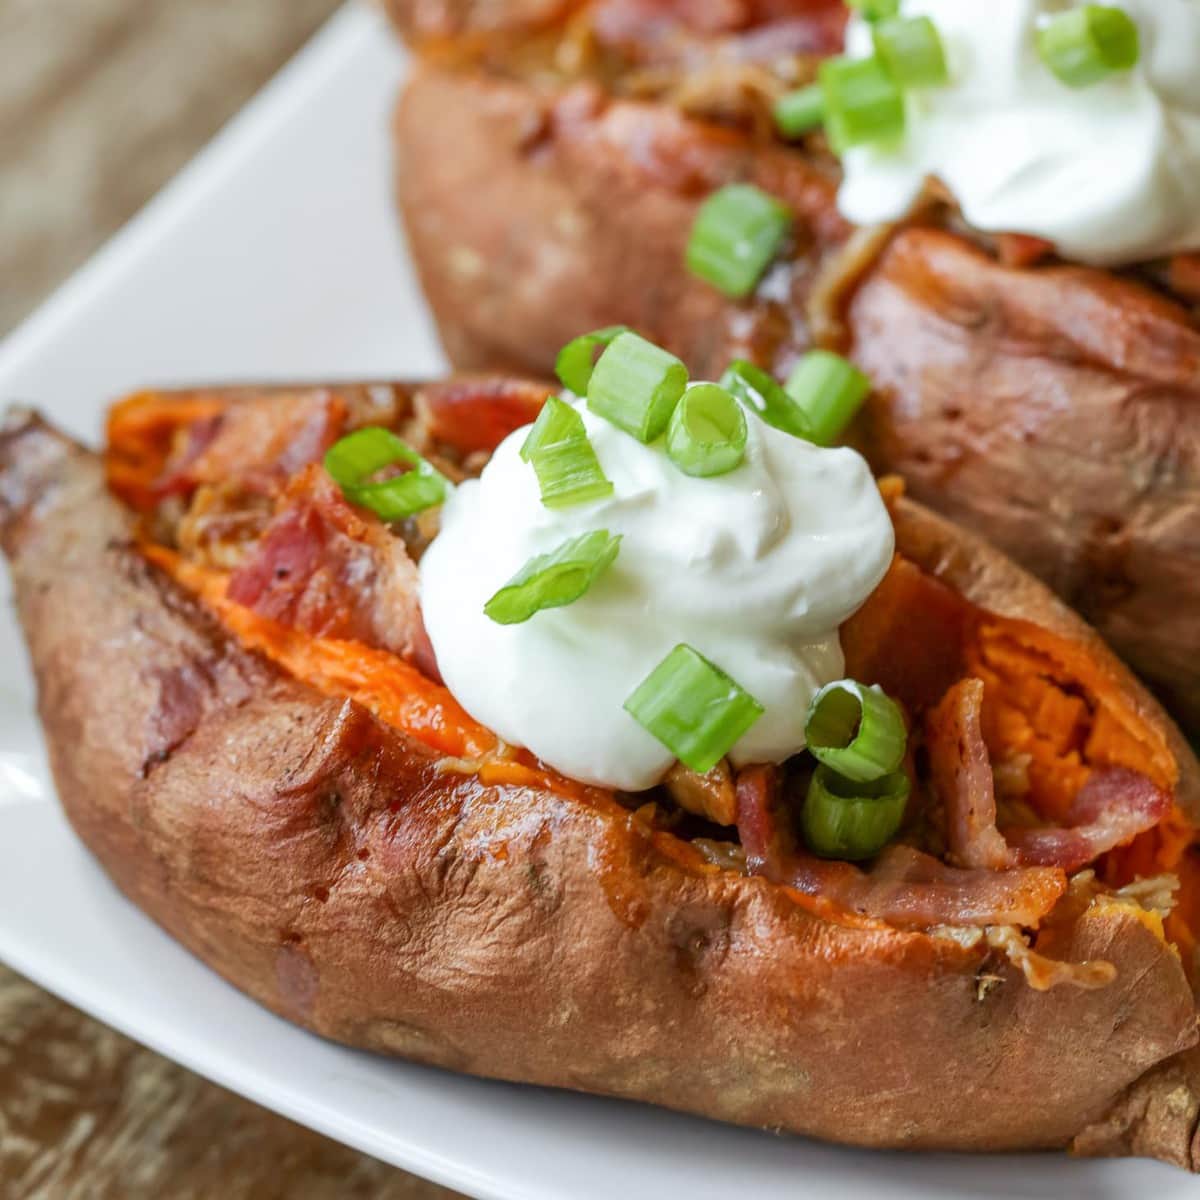 Microwave Sweet Potatoes stuffed with pork and sour cream